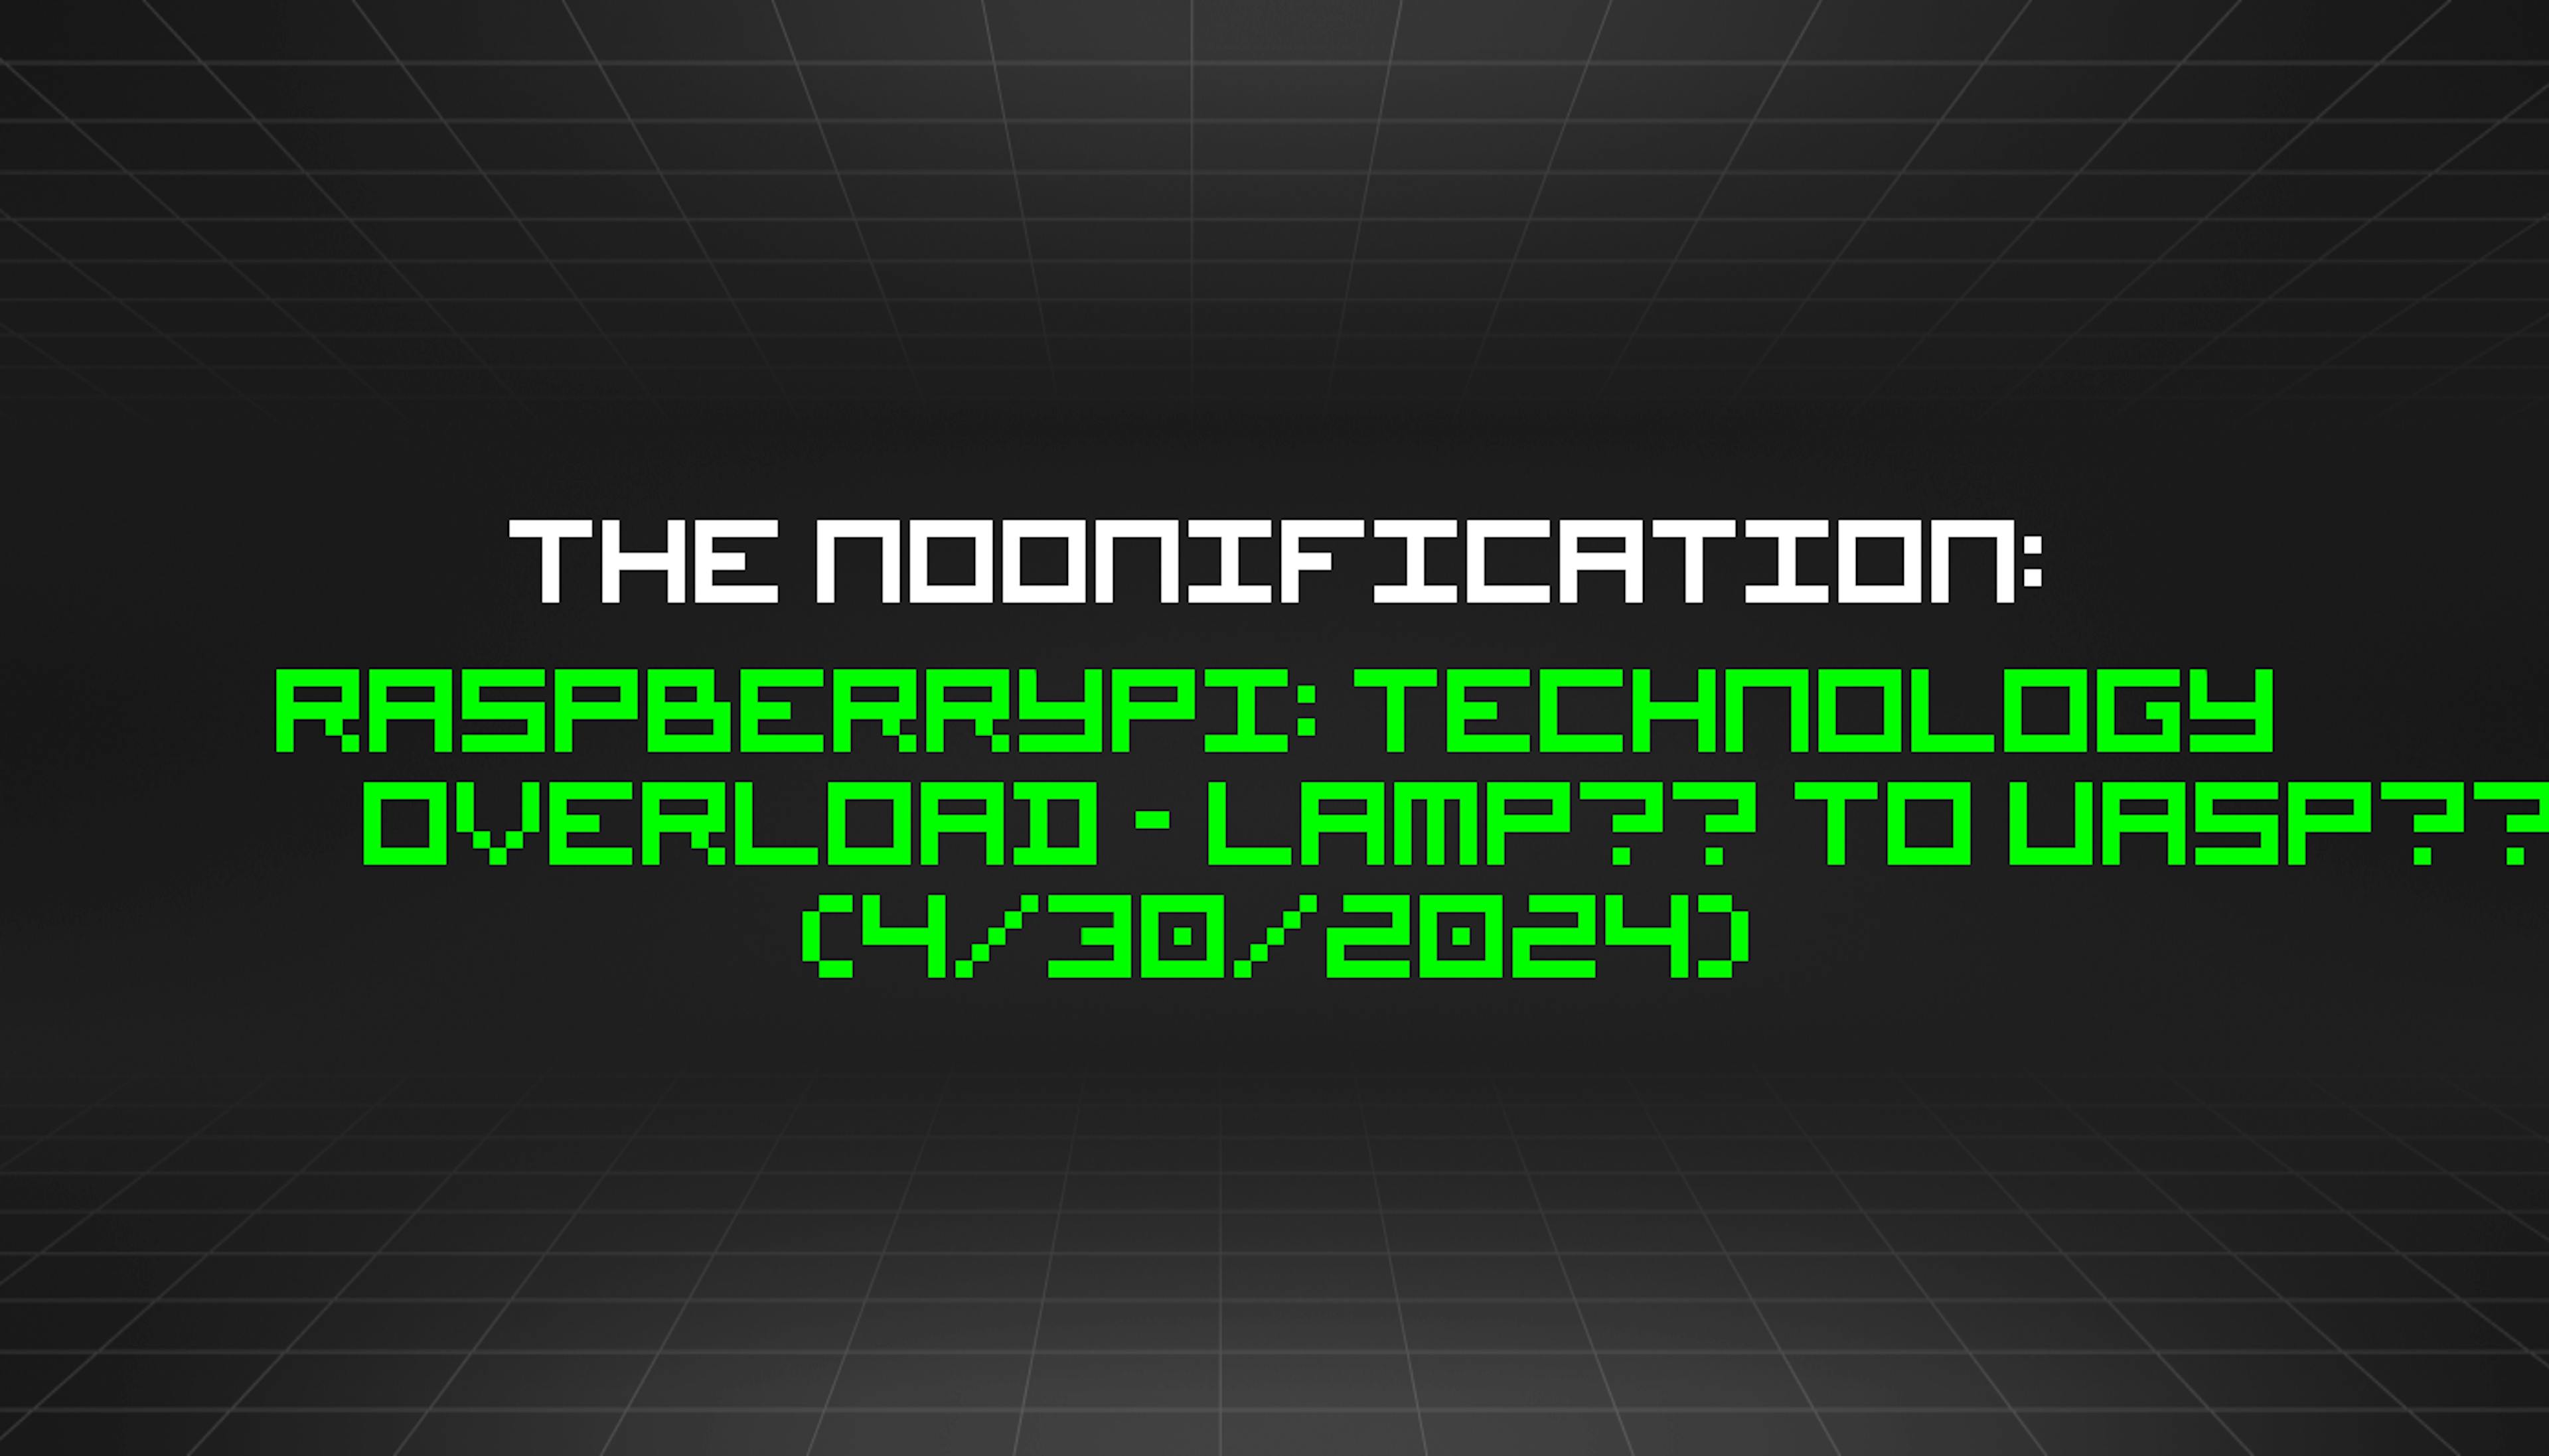 featured image - The Noonification: RaspberryPi: Technology Overload - LAMP🕯 to UASP🐝 (4/30/2024)